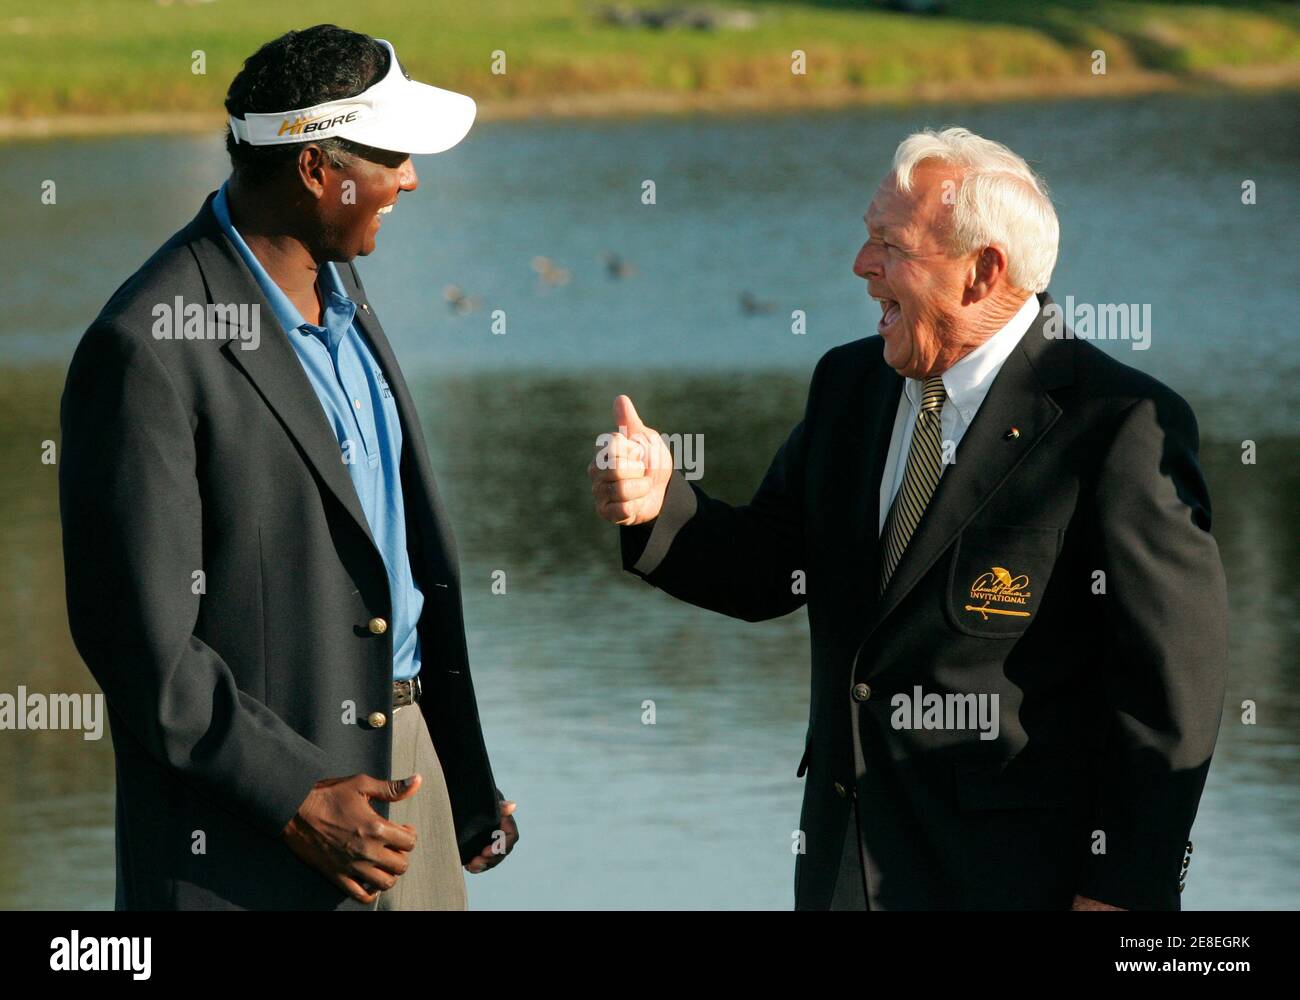 Vijay Singh (L) of Fiji shares a laugh with host Arnold Palmer after winning the Arnold Palmer Invitational golf tournament at the Bay Hill Club in Orlando, Florida, March 18, 2007.    REUTERS/Rick Fowler (UNITED STATES) Stock Photo